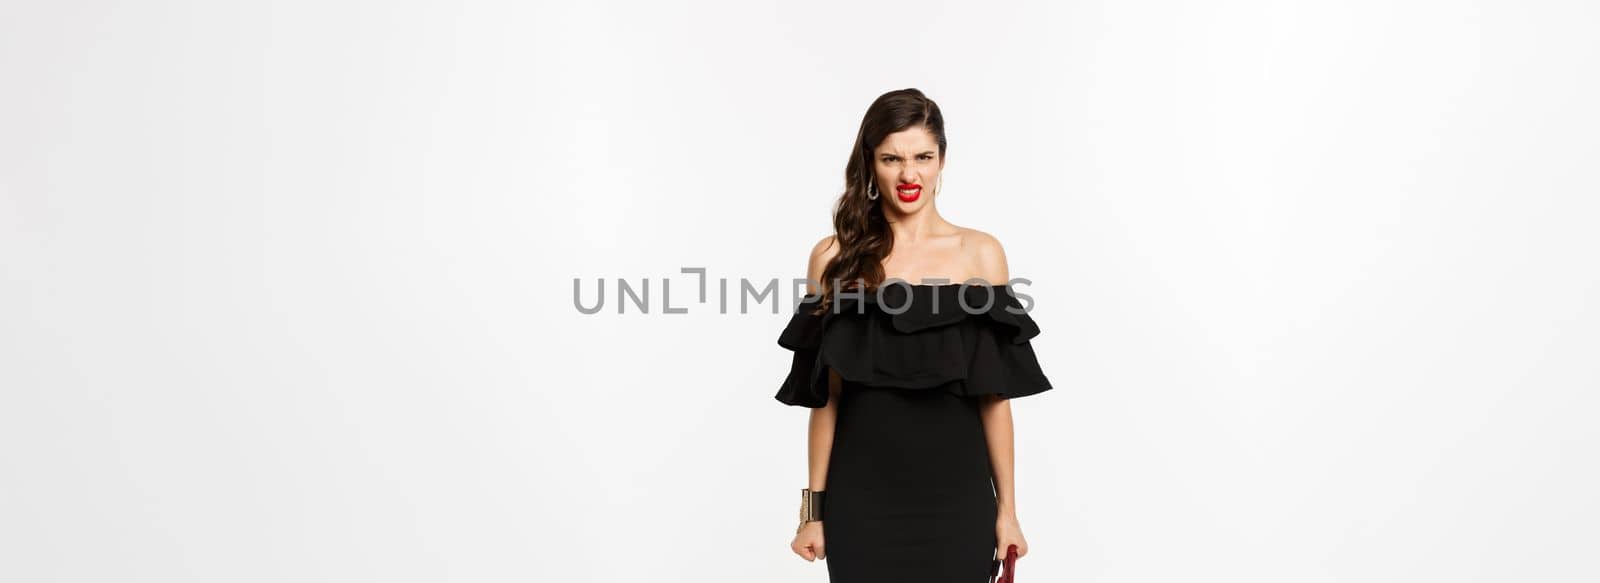 Beauty and fashion concept. Full length of angry woman in black party dress and high heels, express disdain and grimacing at camera, mad at person, white background.